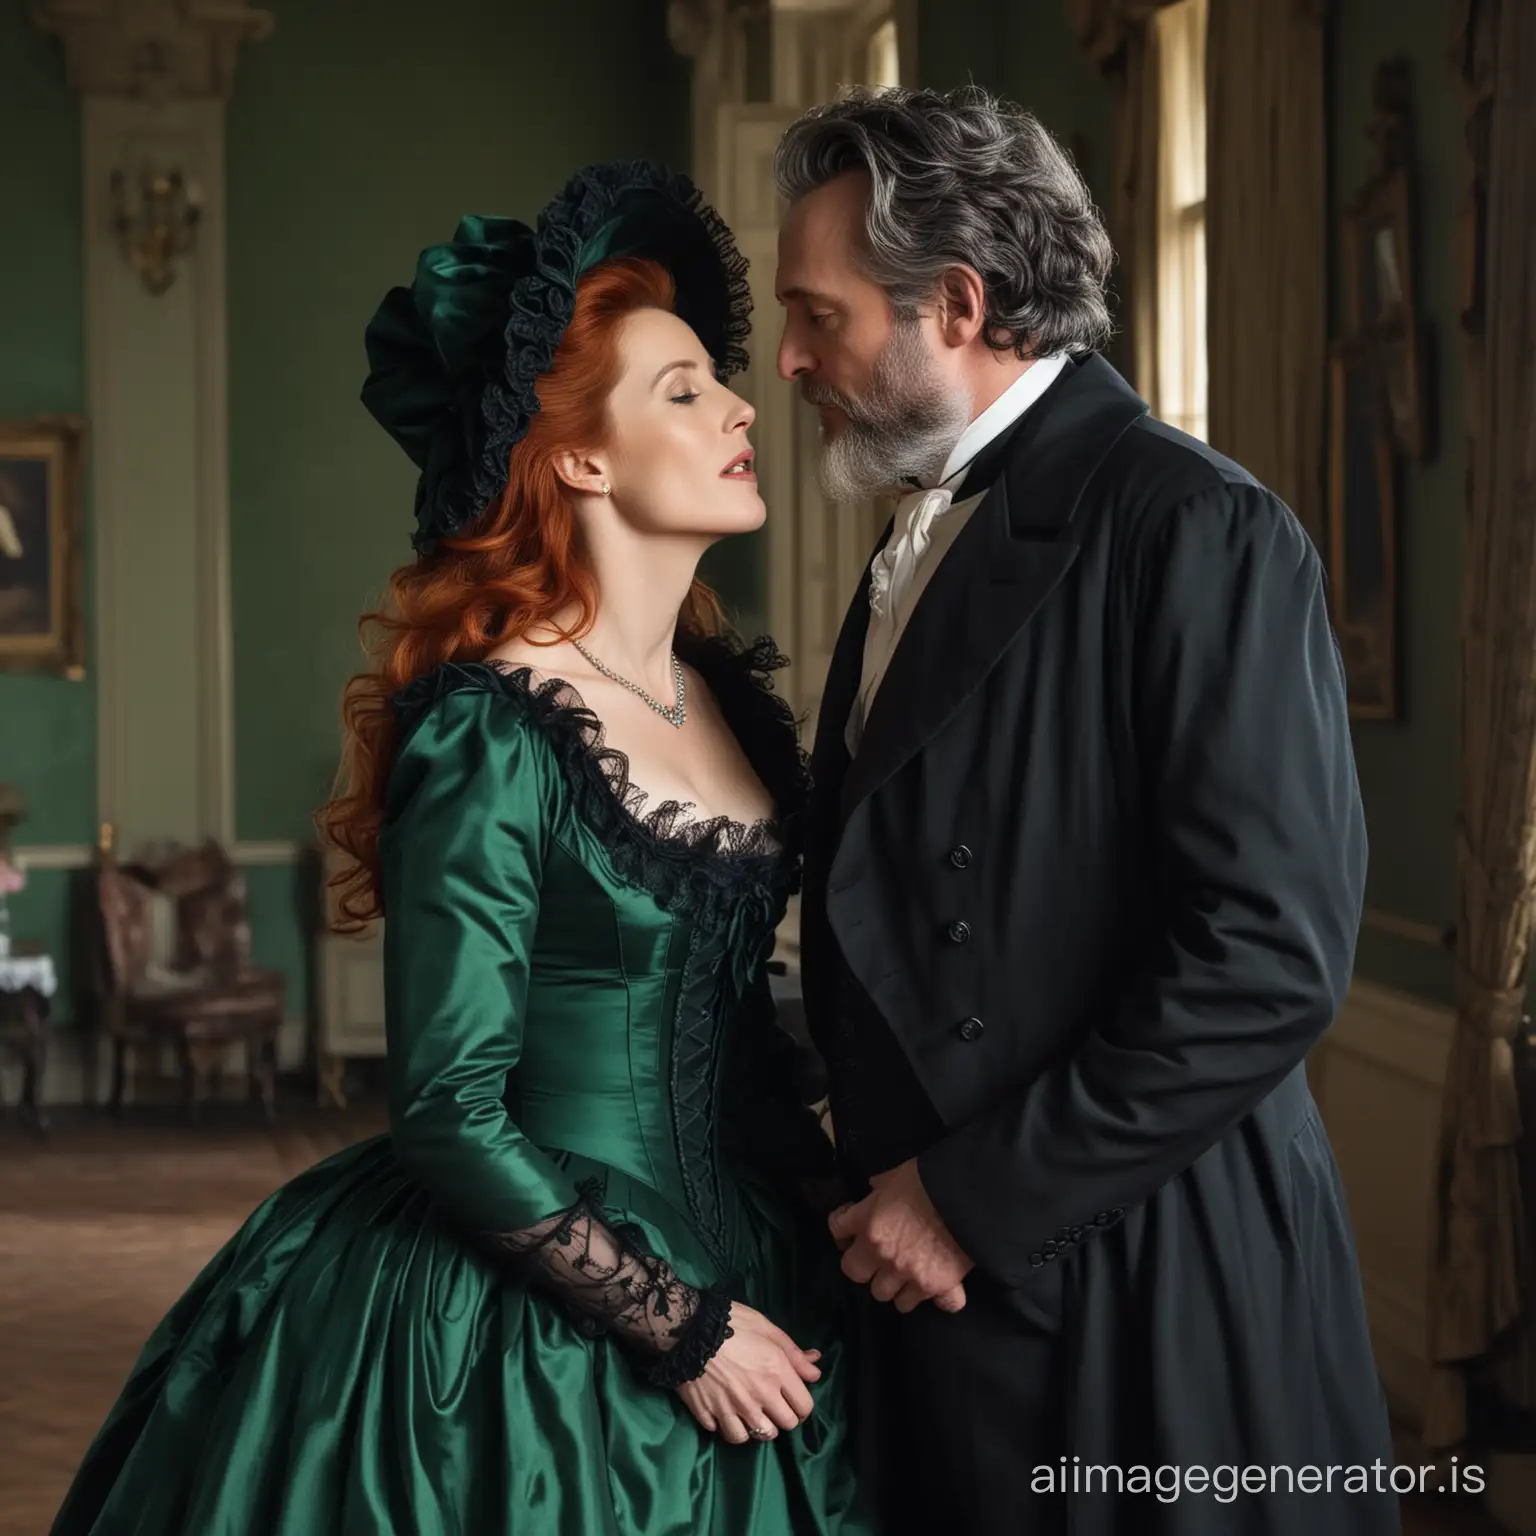 red hair fat Gillian Anderson wearing a dark green floor-length loose billowing 1860 victorian crinoline high collared dress with a frilly bonnet kissing an old dressed man dressed into a black victorian suit who seems to be her newlywed husband
